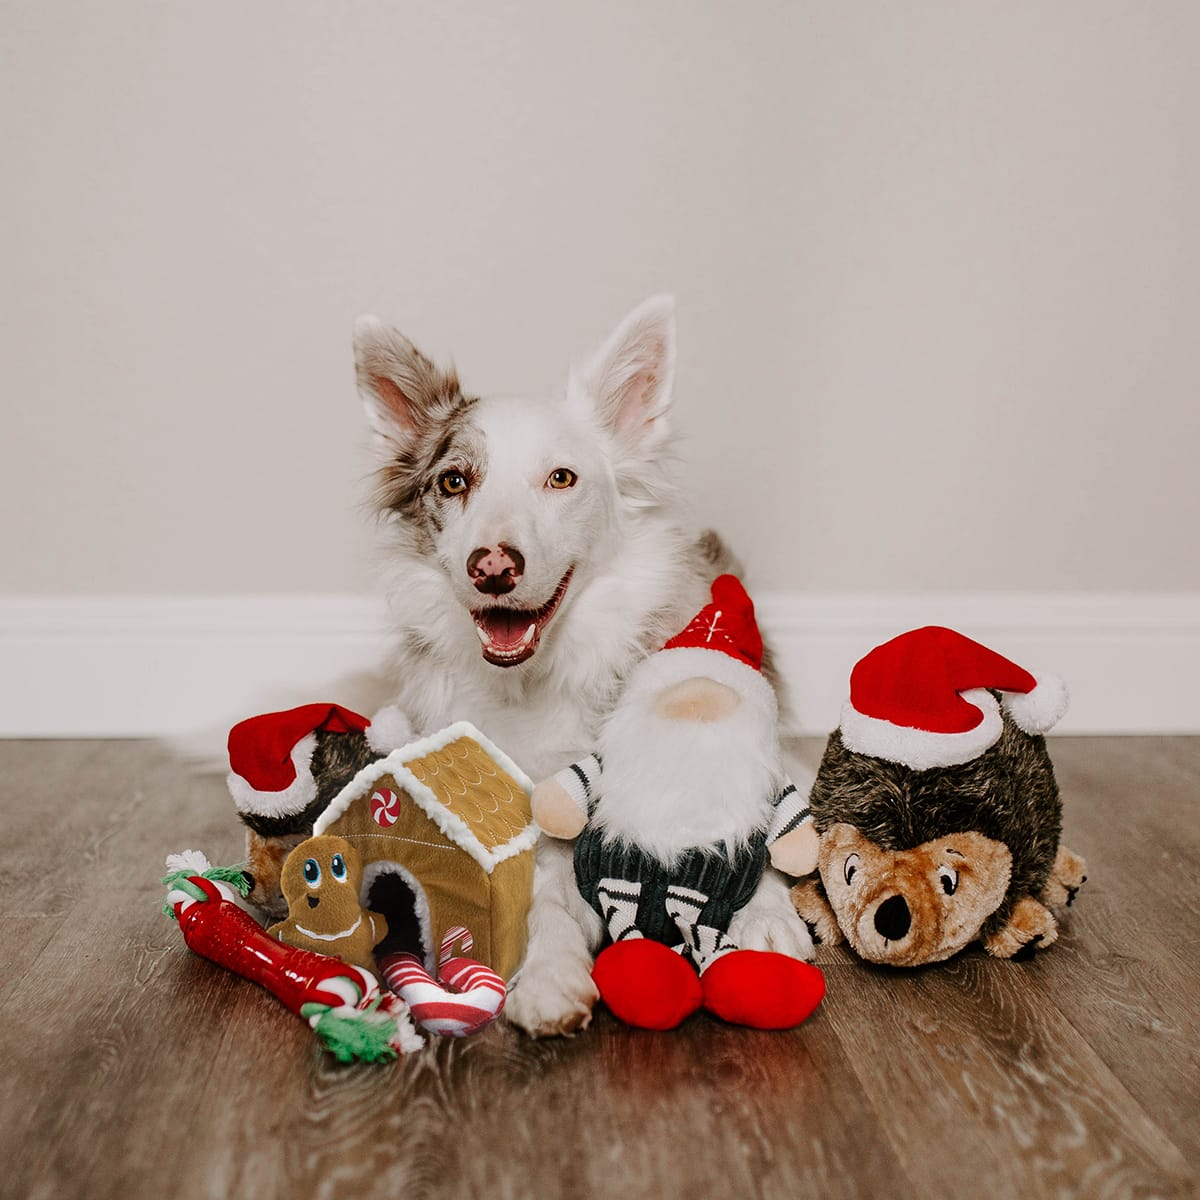 2022 Holiday Gift Guide: Gifts for New Dog Owners